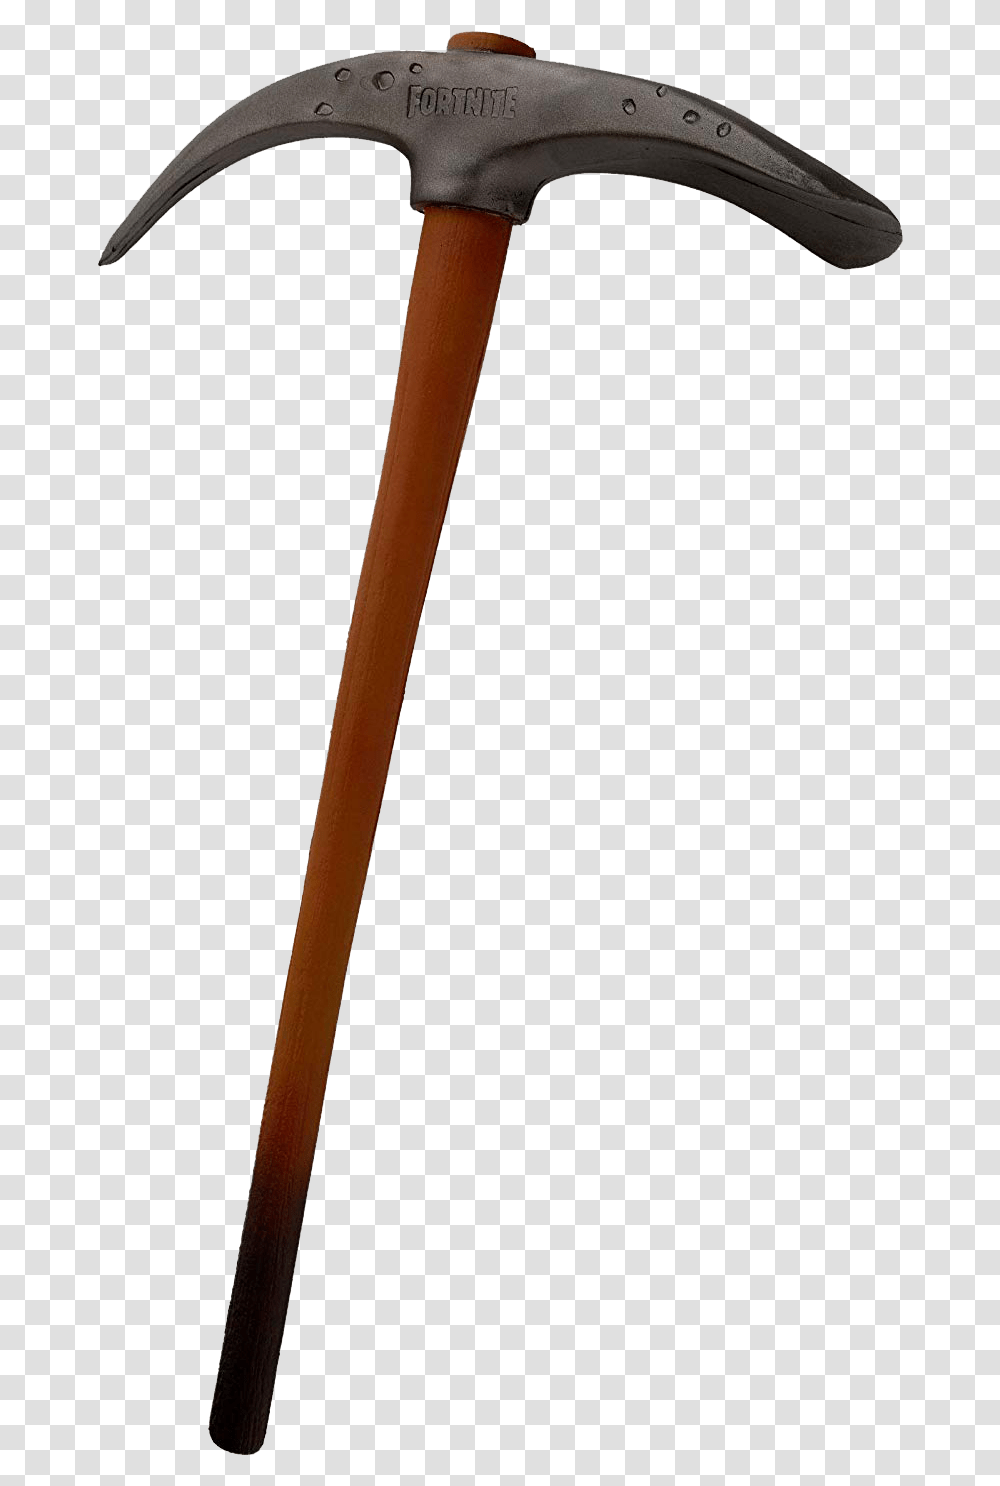 Fortnite Pickaxe Background 7 Free Tiers Spirit Halloween Fortnite Pickaxe, Hammer, Tool, Weapon, Weaponry Transparent Png